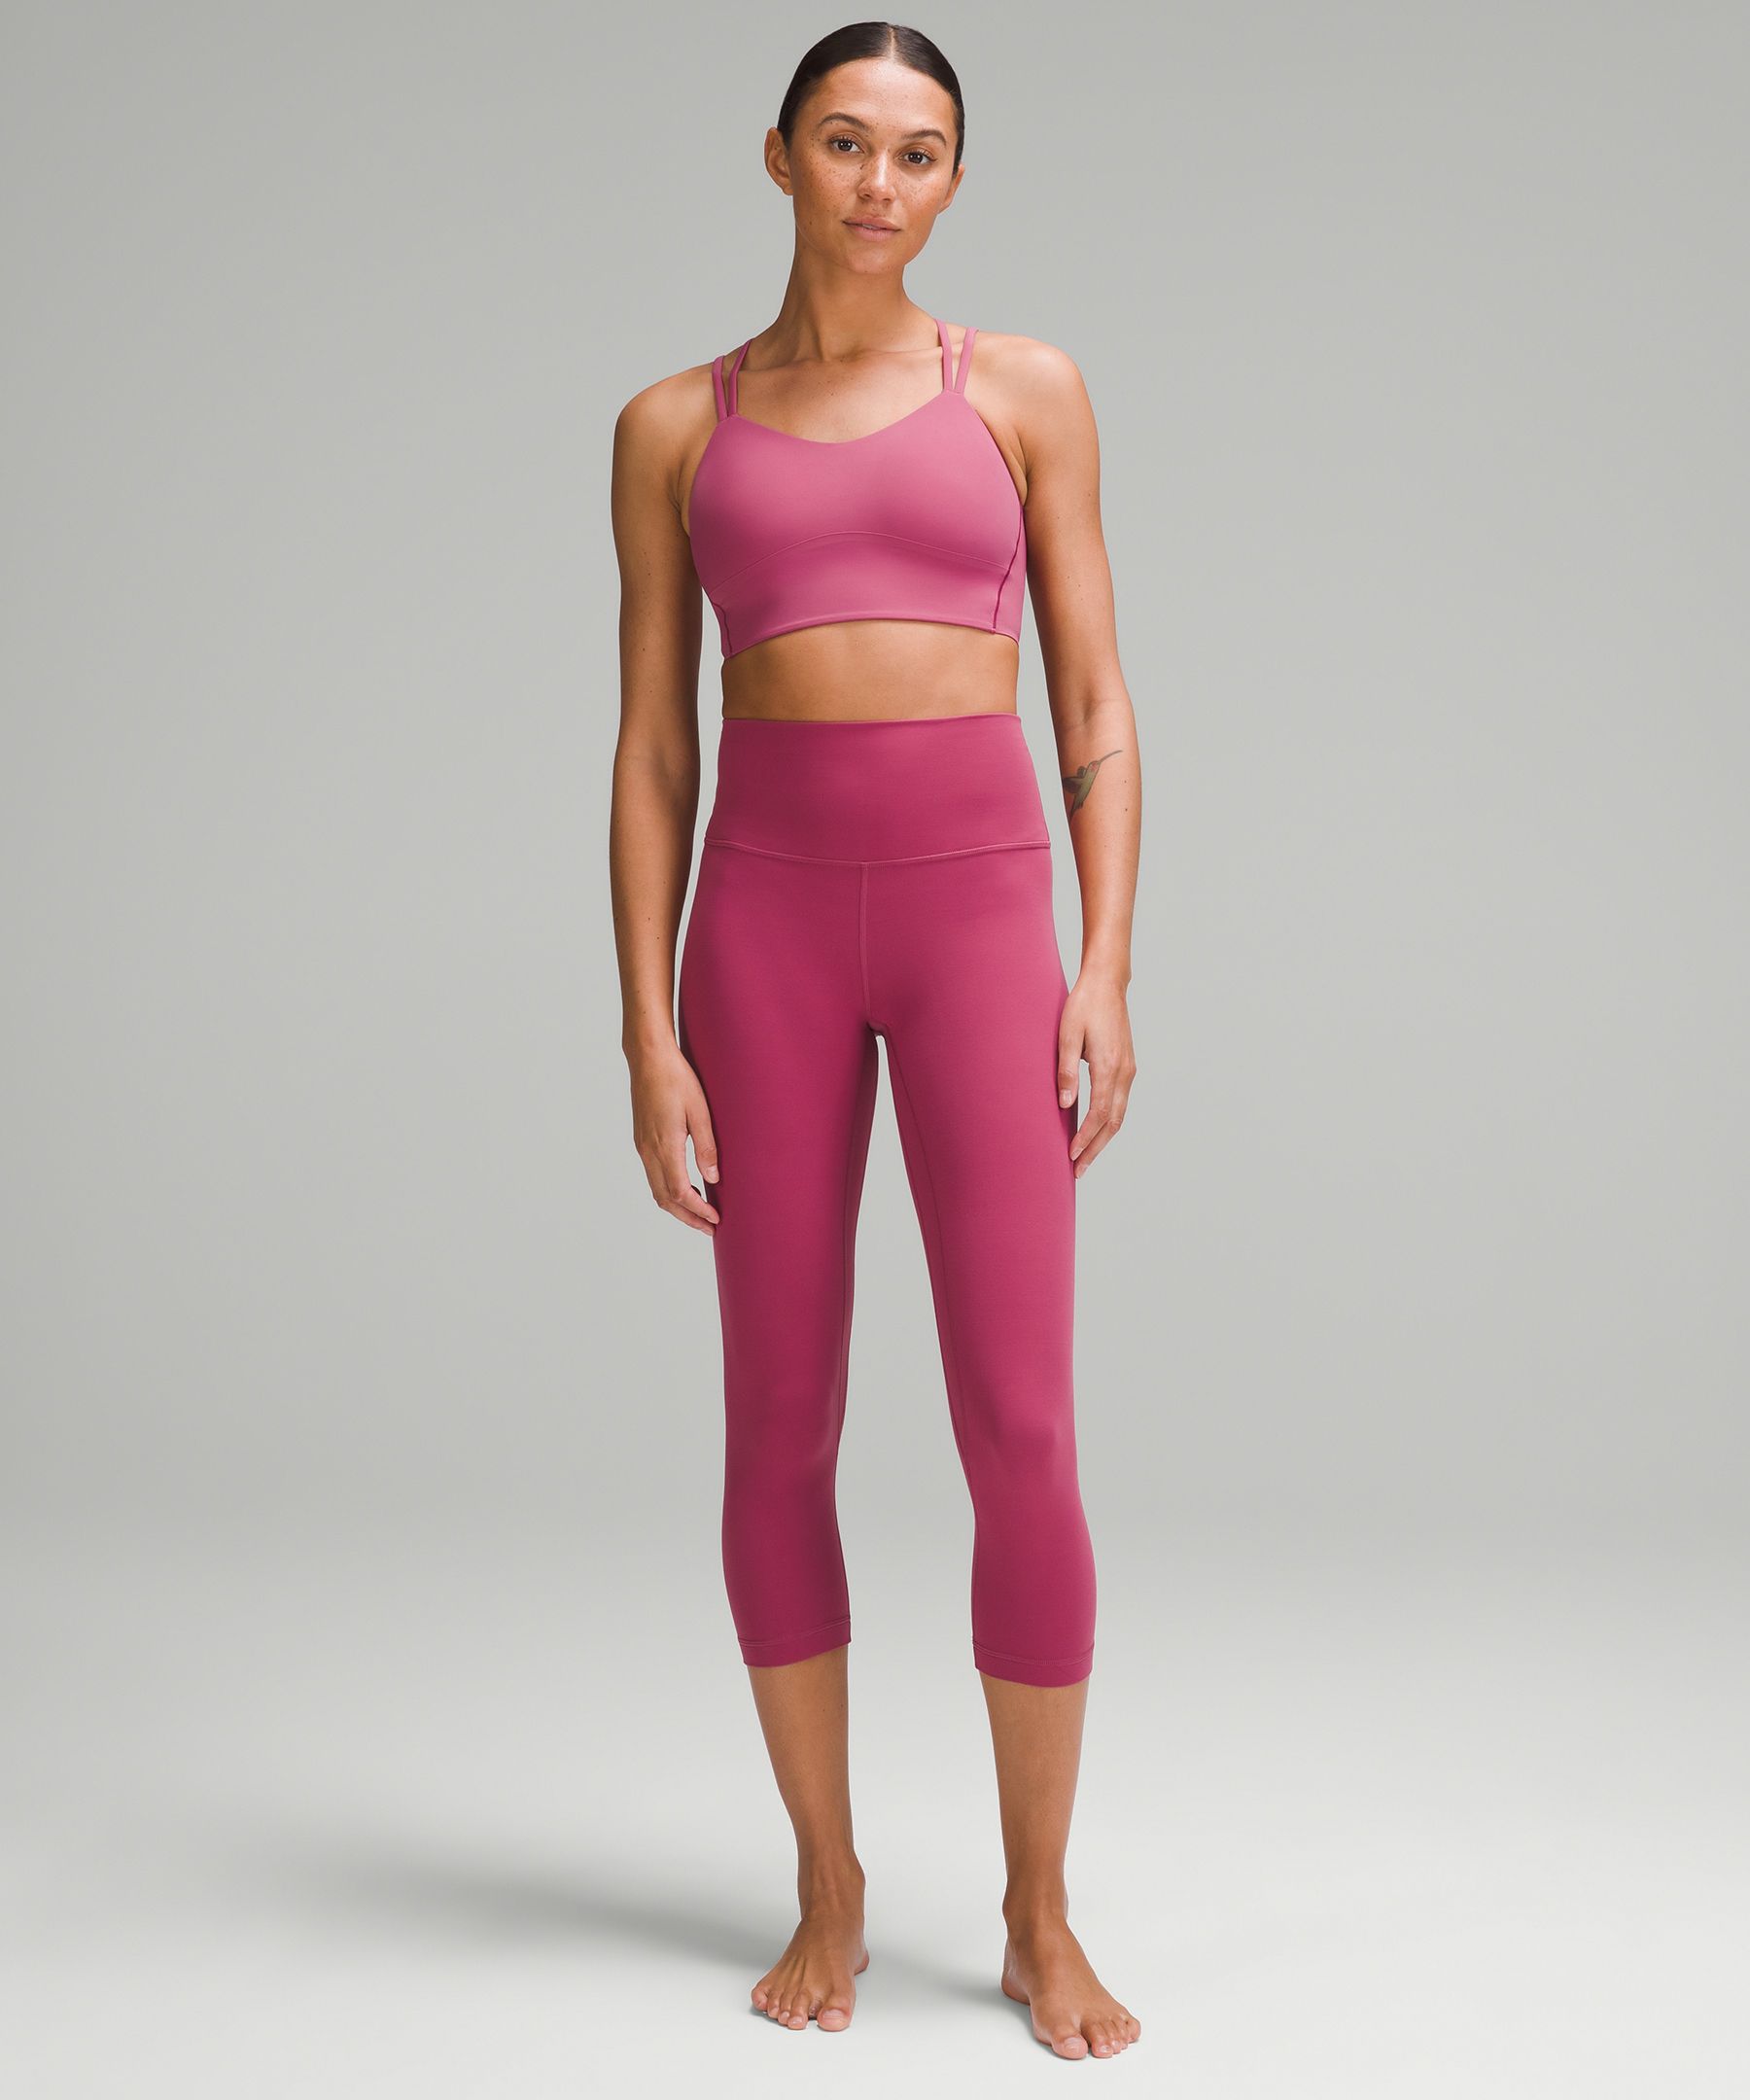 New with tags ladies Lululemon size 20 yoga or India